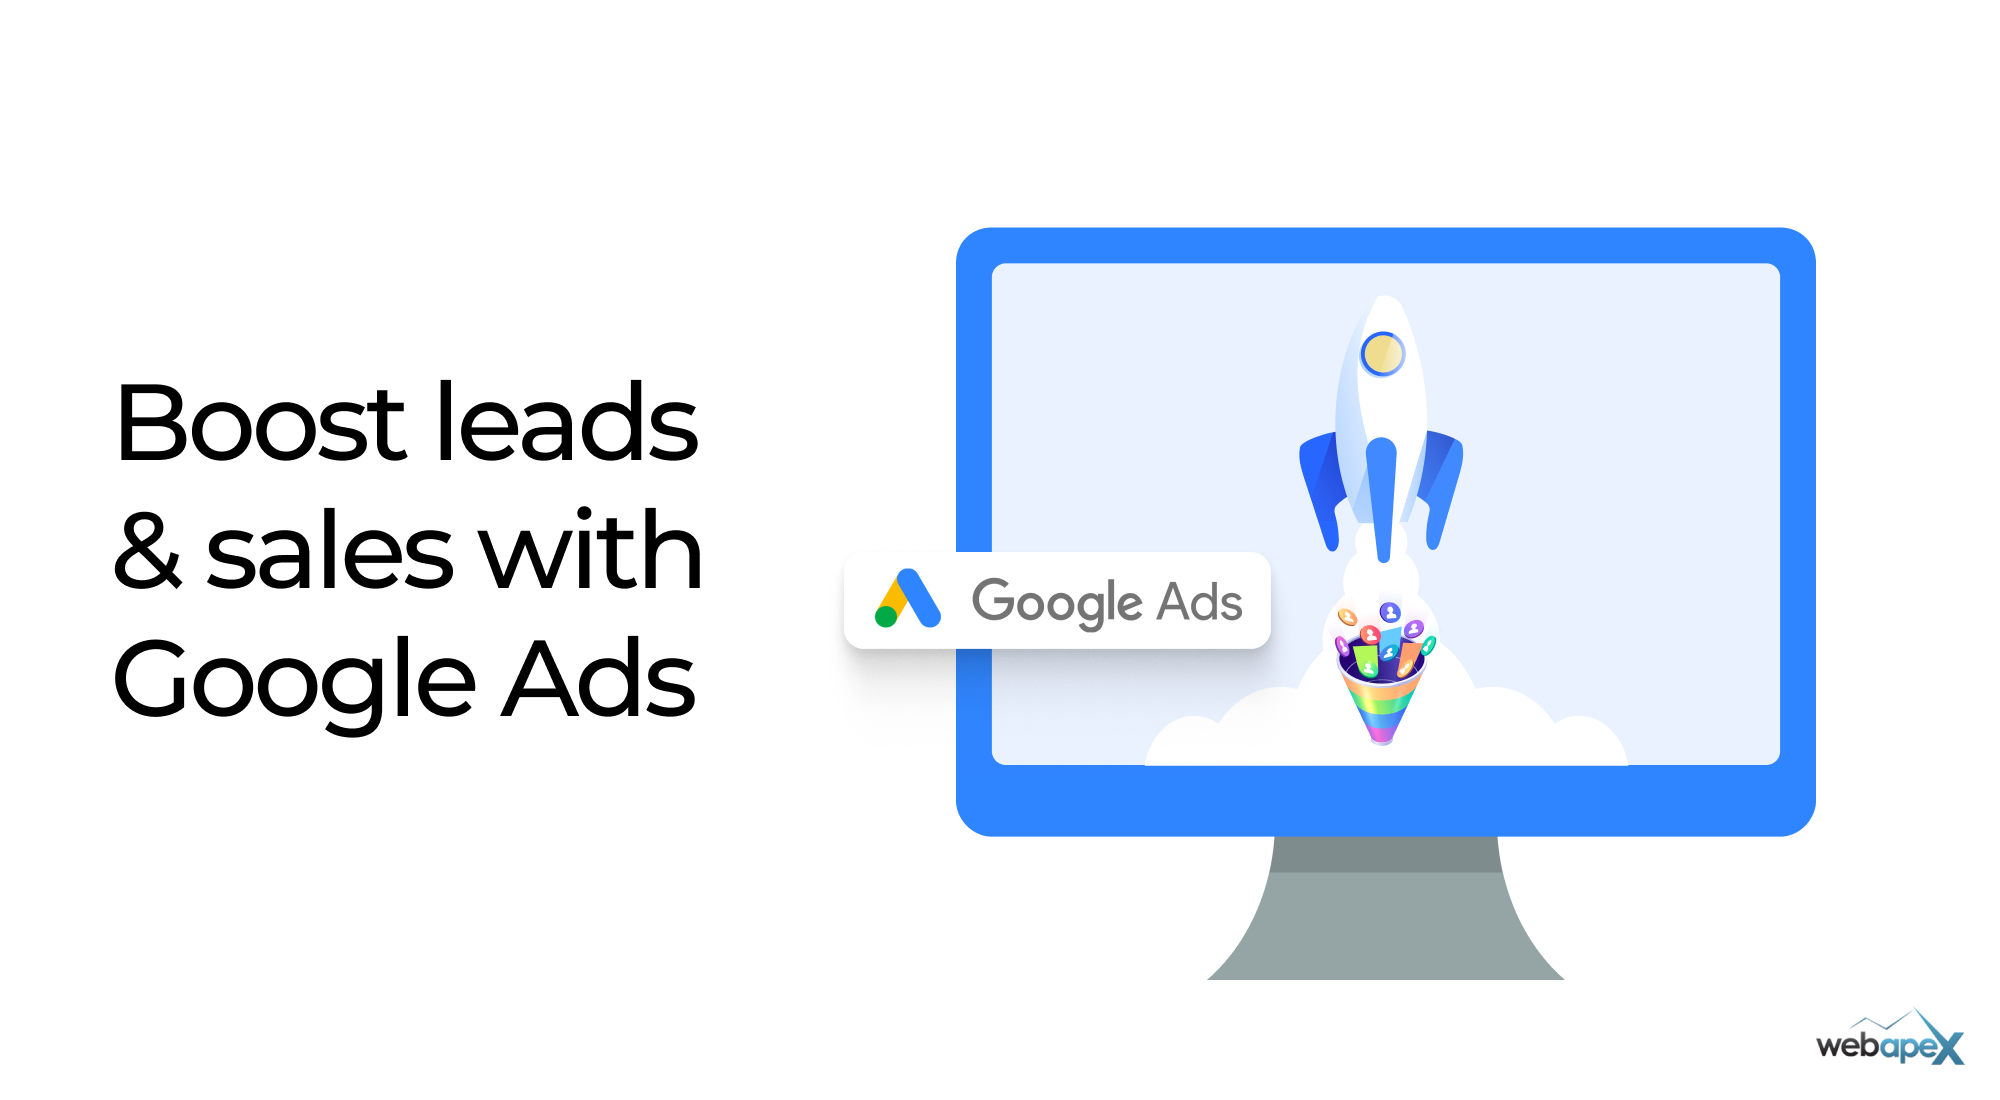 How to boost Google Ads leads and sales?